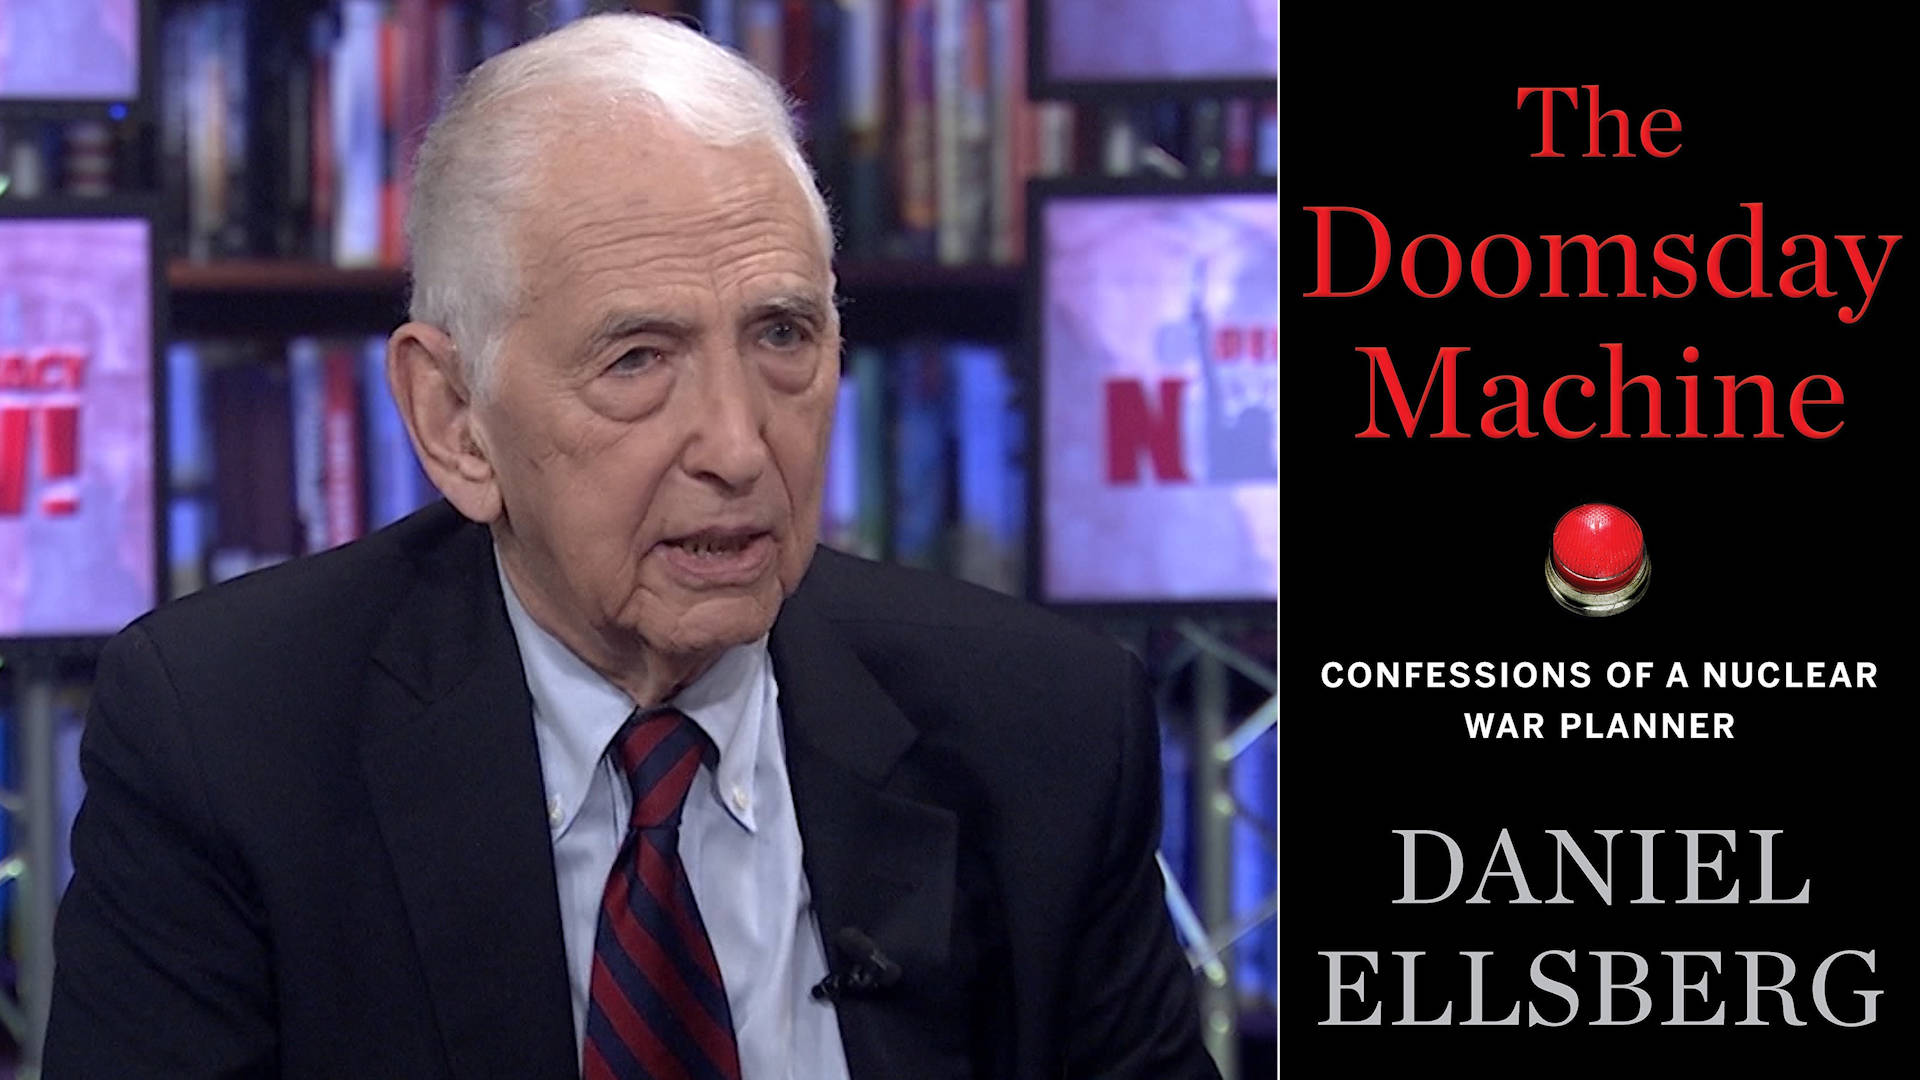 The Doomsday Machine”: Confessions of Daniel Ellsberg, Former Nuclear War Planner | Democracy Now!